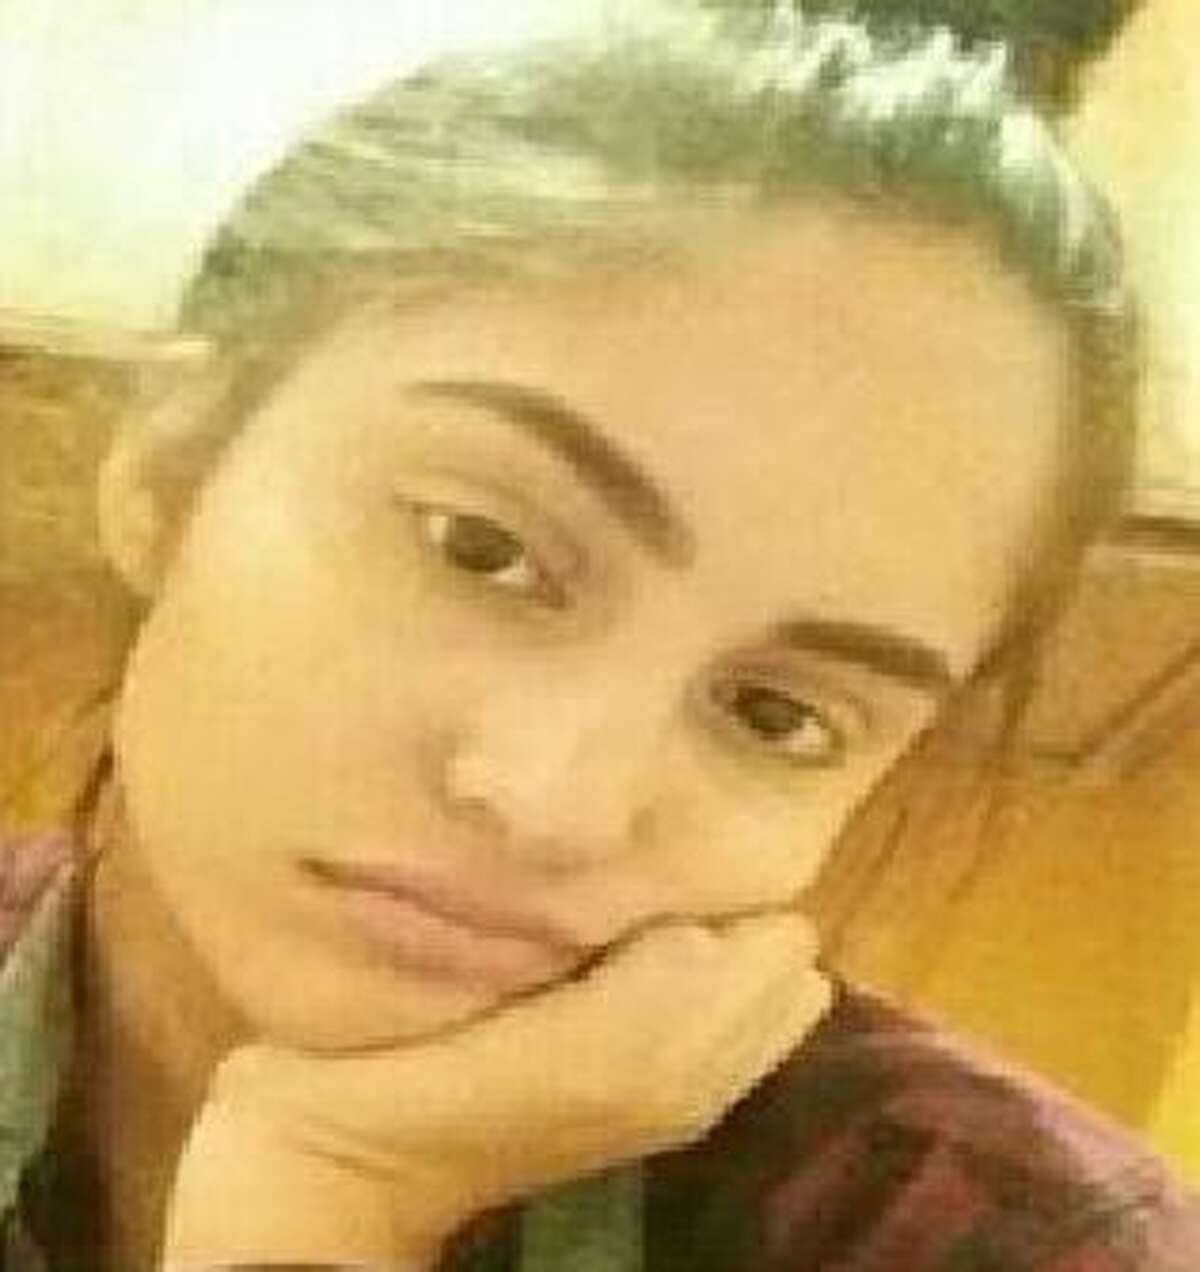 Kiara Soto, 15, was last seen on Jan. 27, according to a statement from The Center for Search and Investigation for Missing Children.